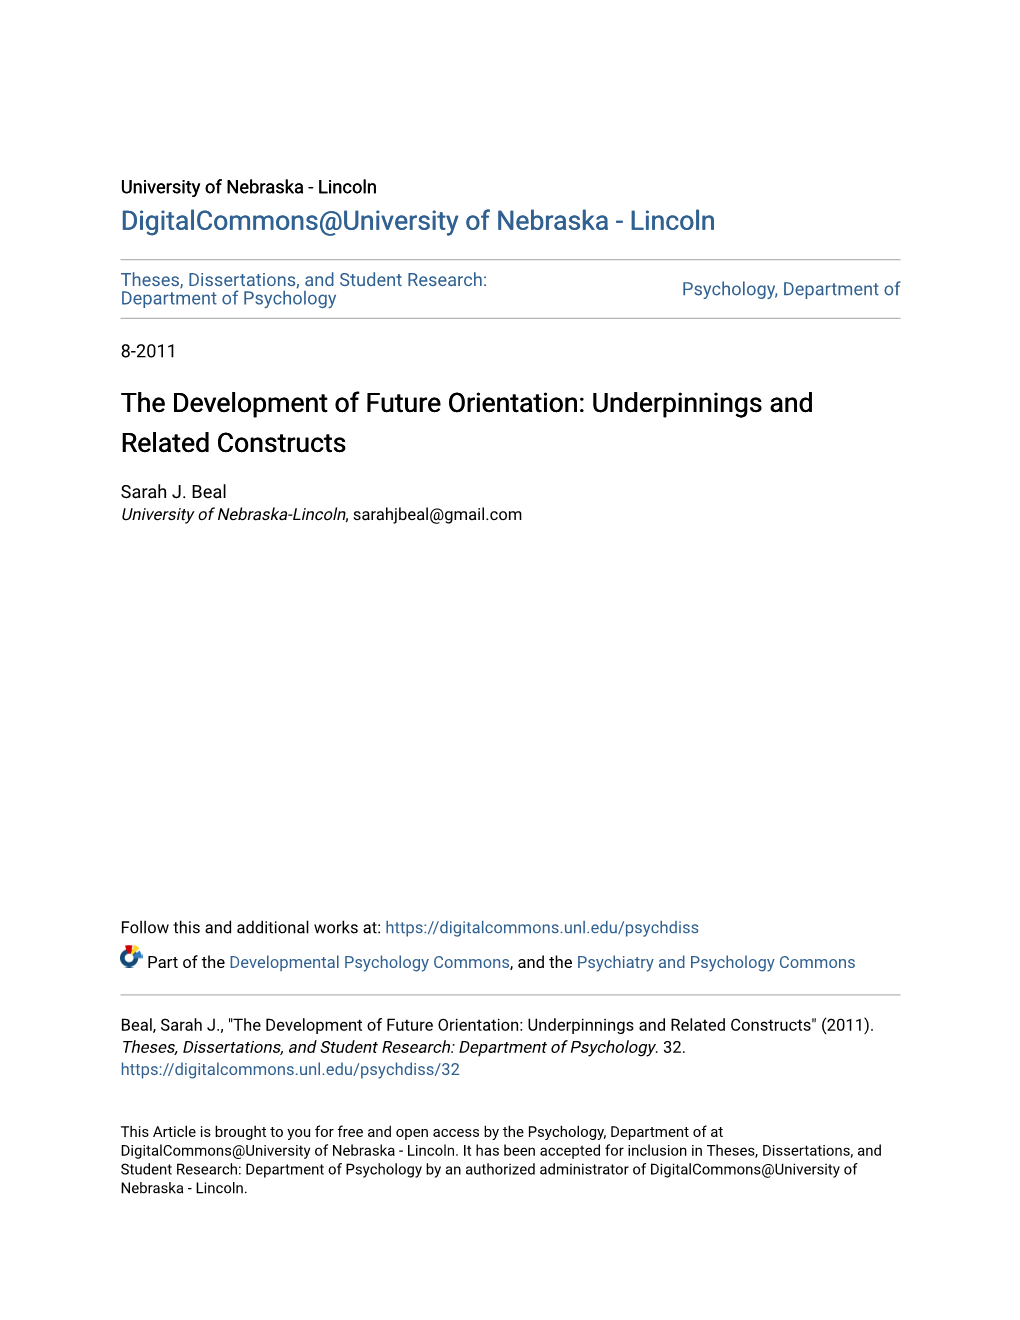 The Development of Future Orientation: Underpinnings and Related Constructs